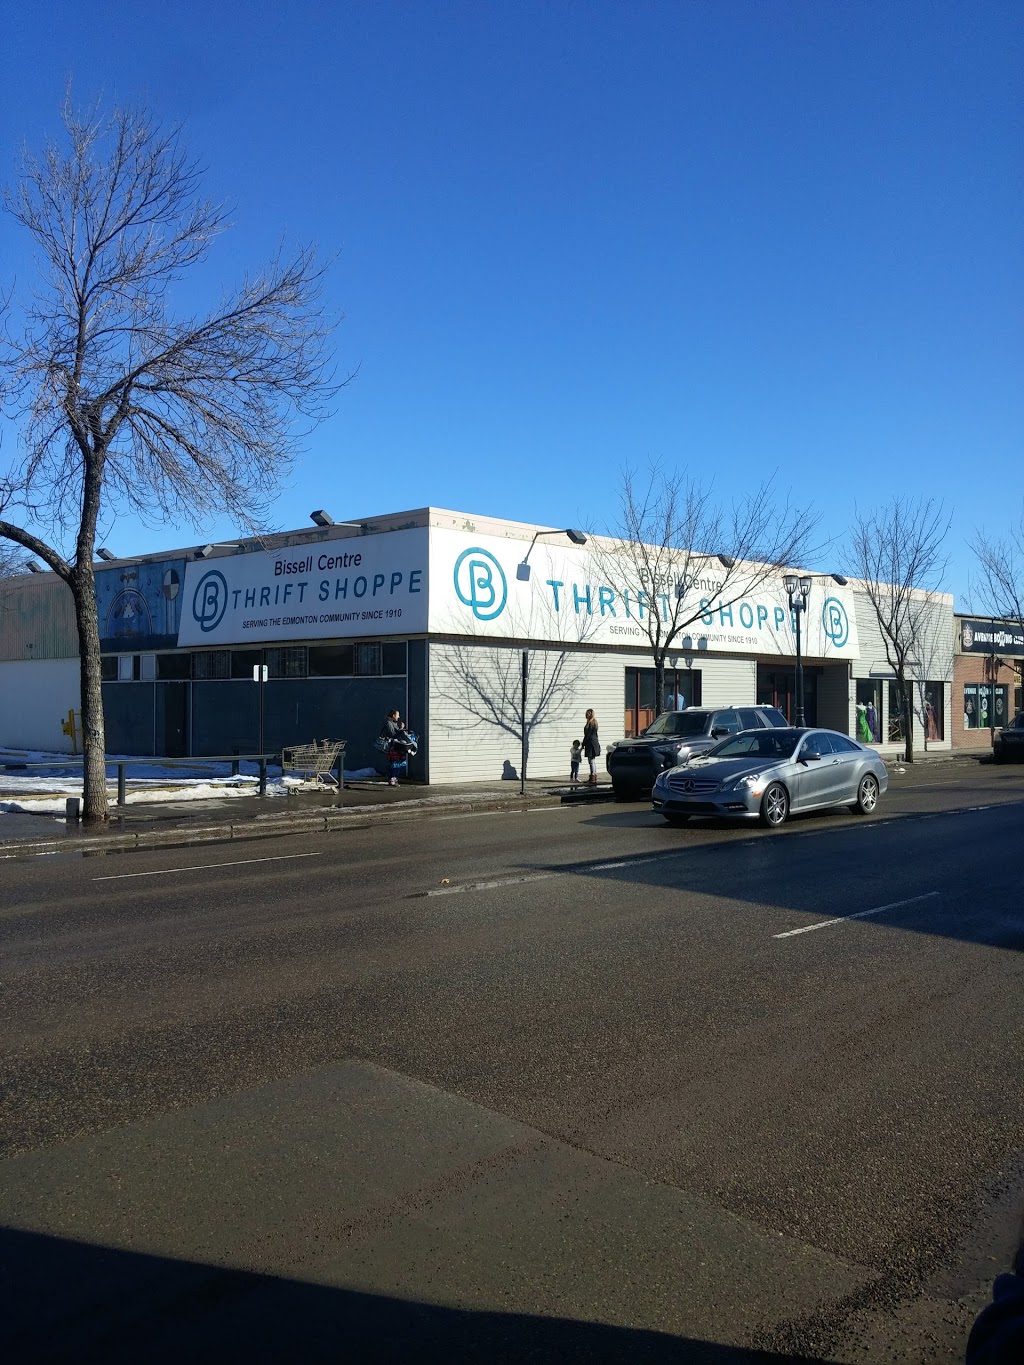 Bissell Centre Thrift Shop | store | 8818 118 Ave NW, Edmonton, AB T5B 0T4, Canada | 7804716644 OR +1 780-471-6644